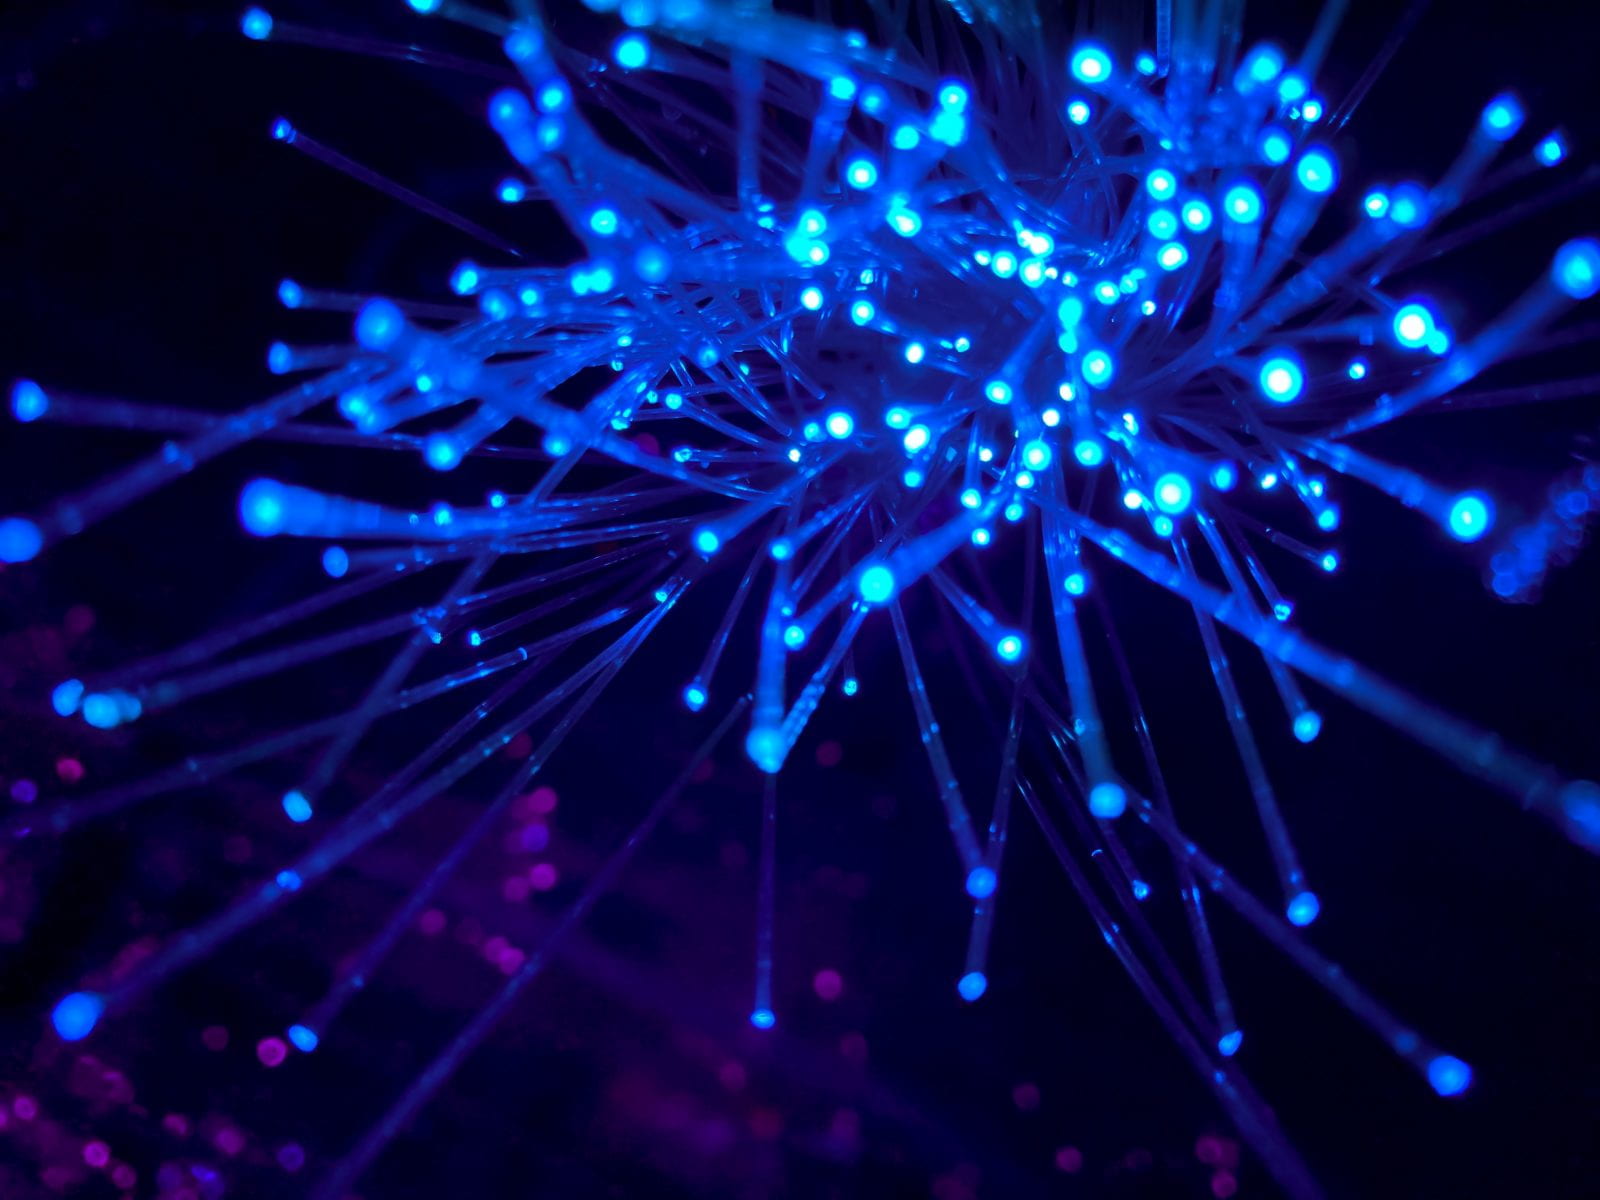 abstract image of fiber optic cable network